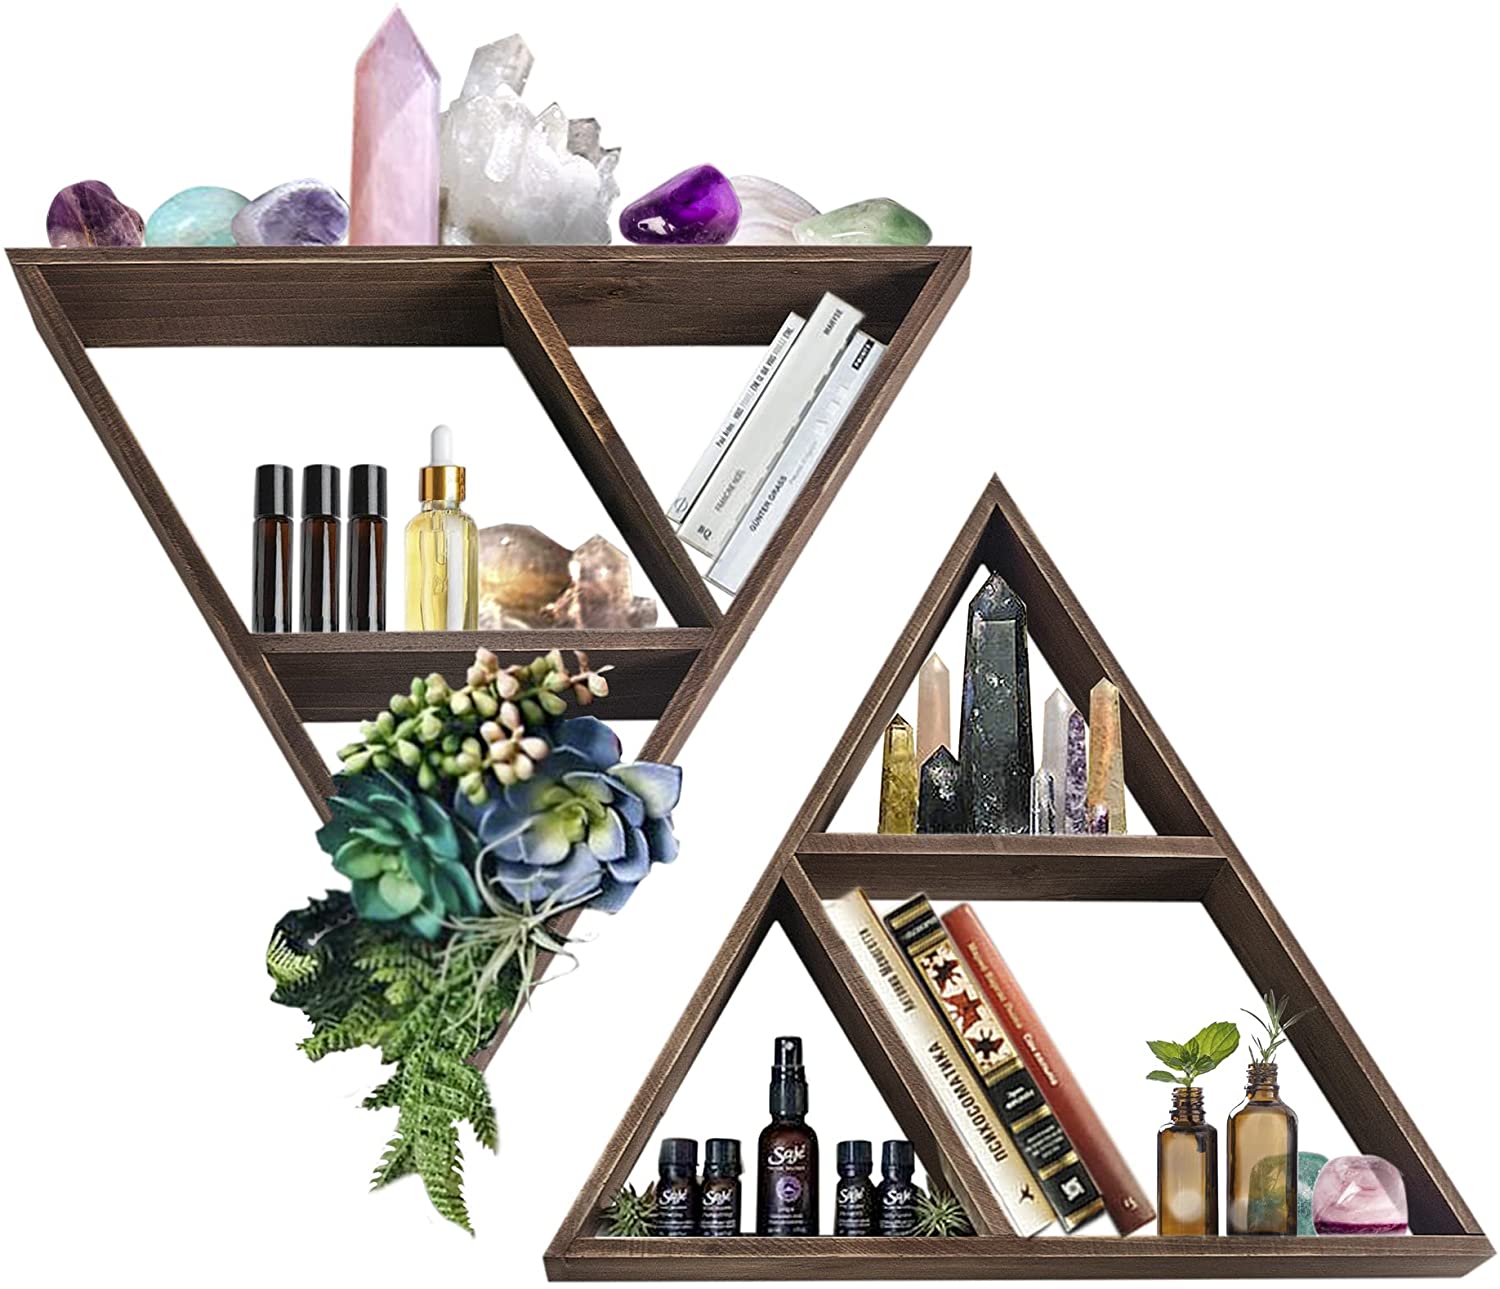 Rustic Home Decor Triangle Shelf: Wall Display for Crystals